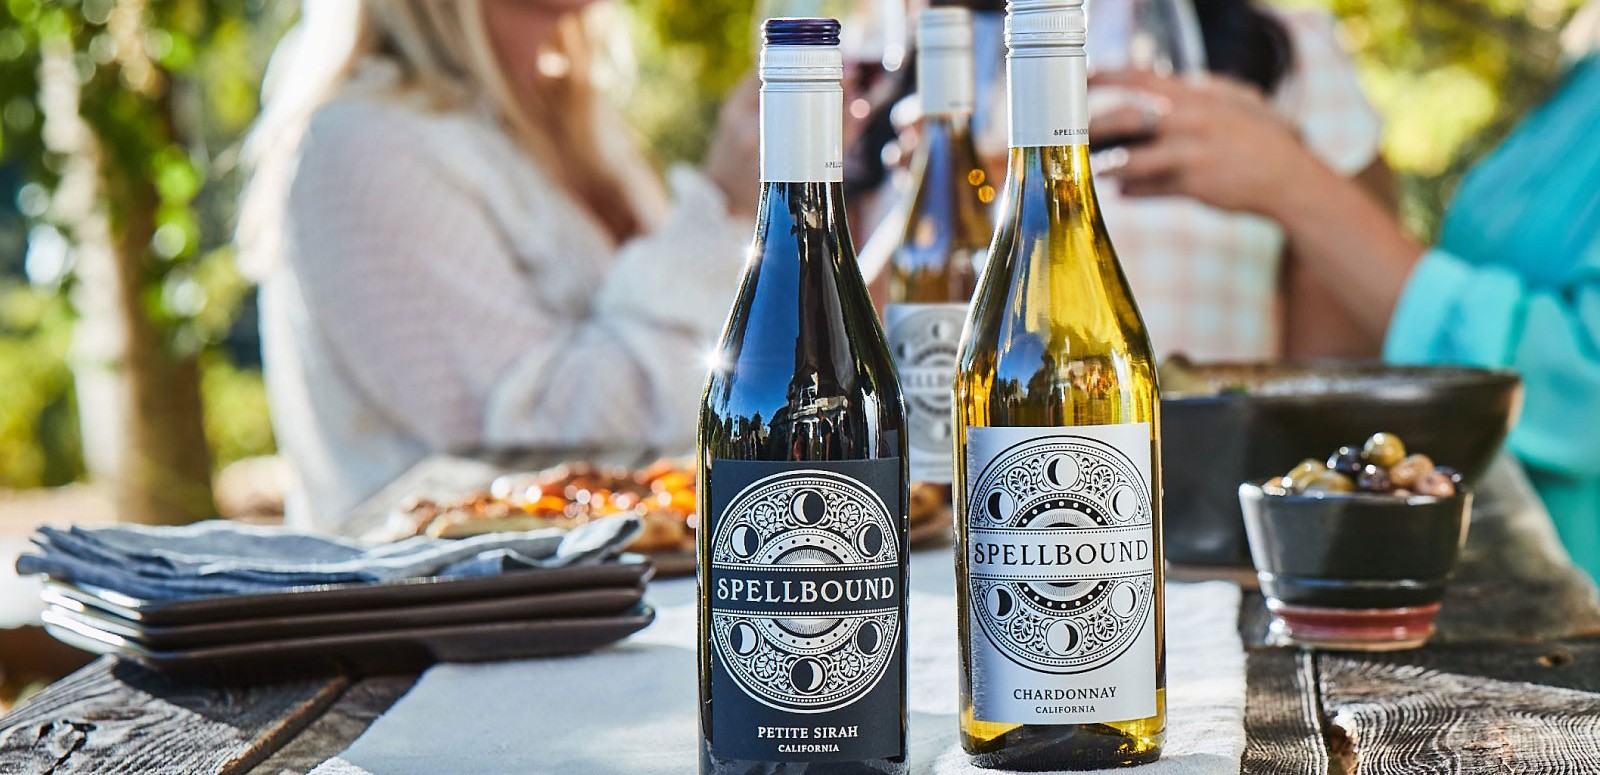 Two bottles of Spellbound wine with people having fun in background